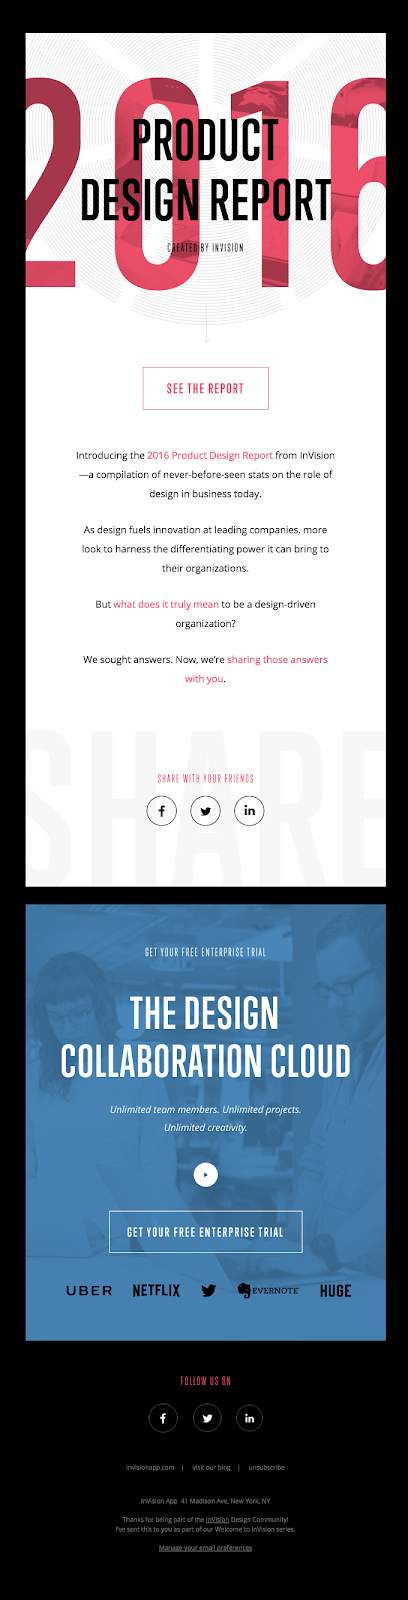 Invision email